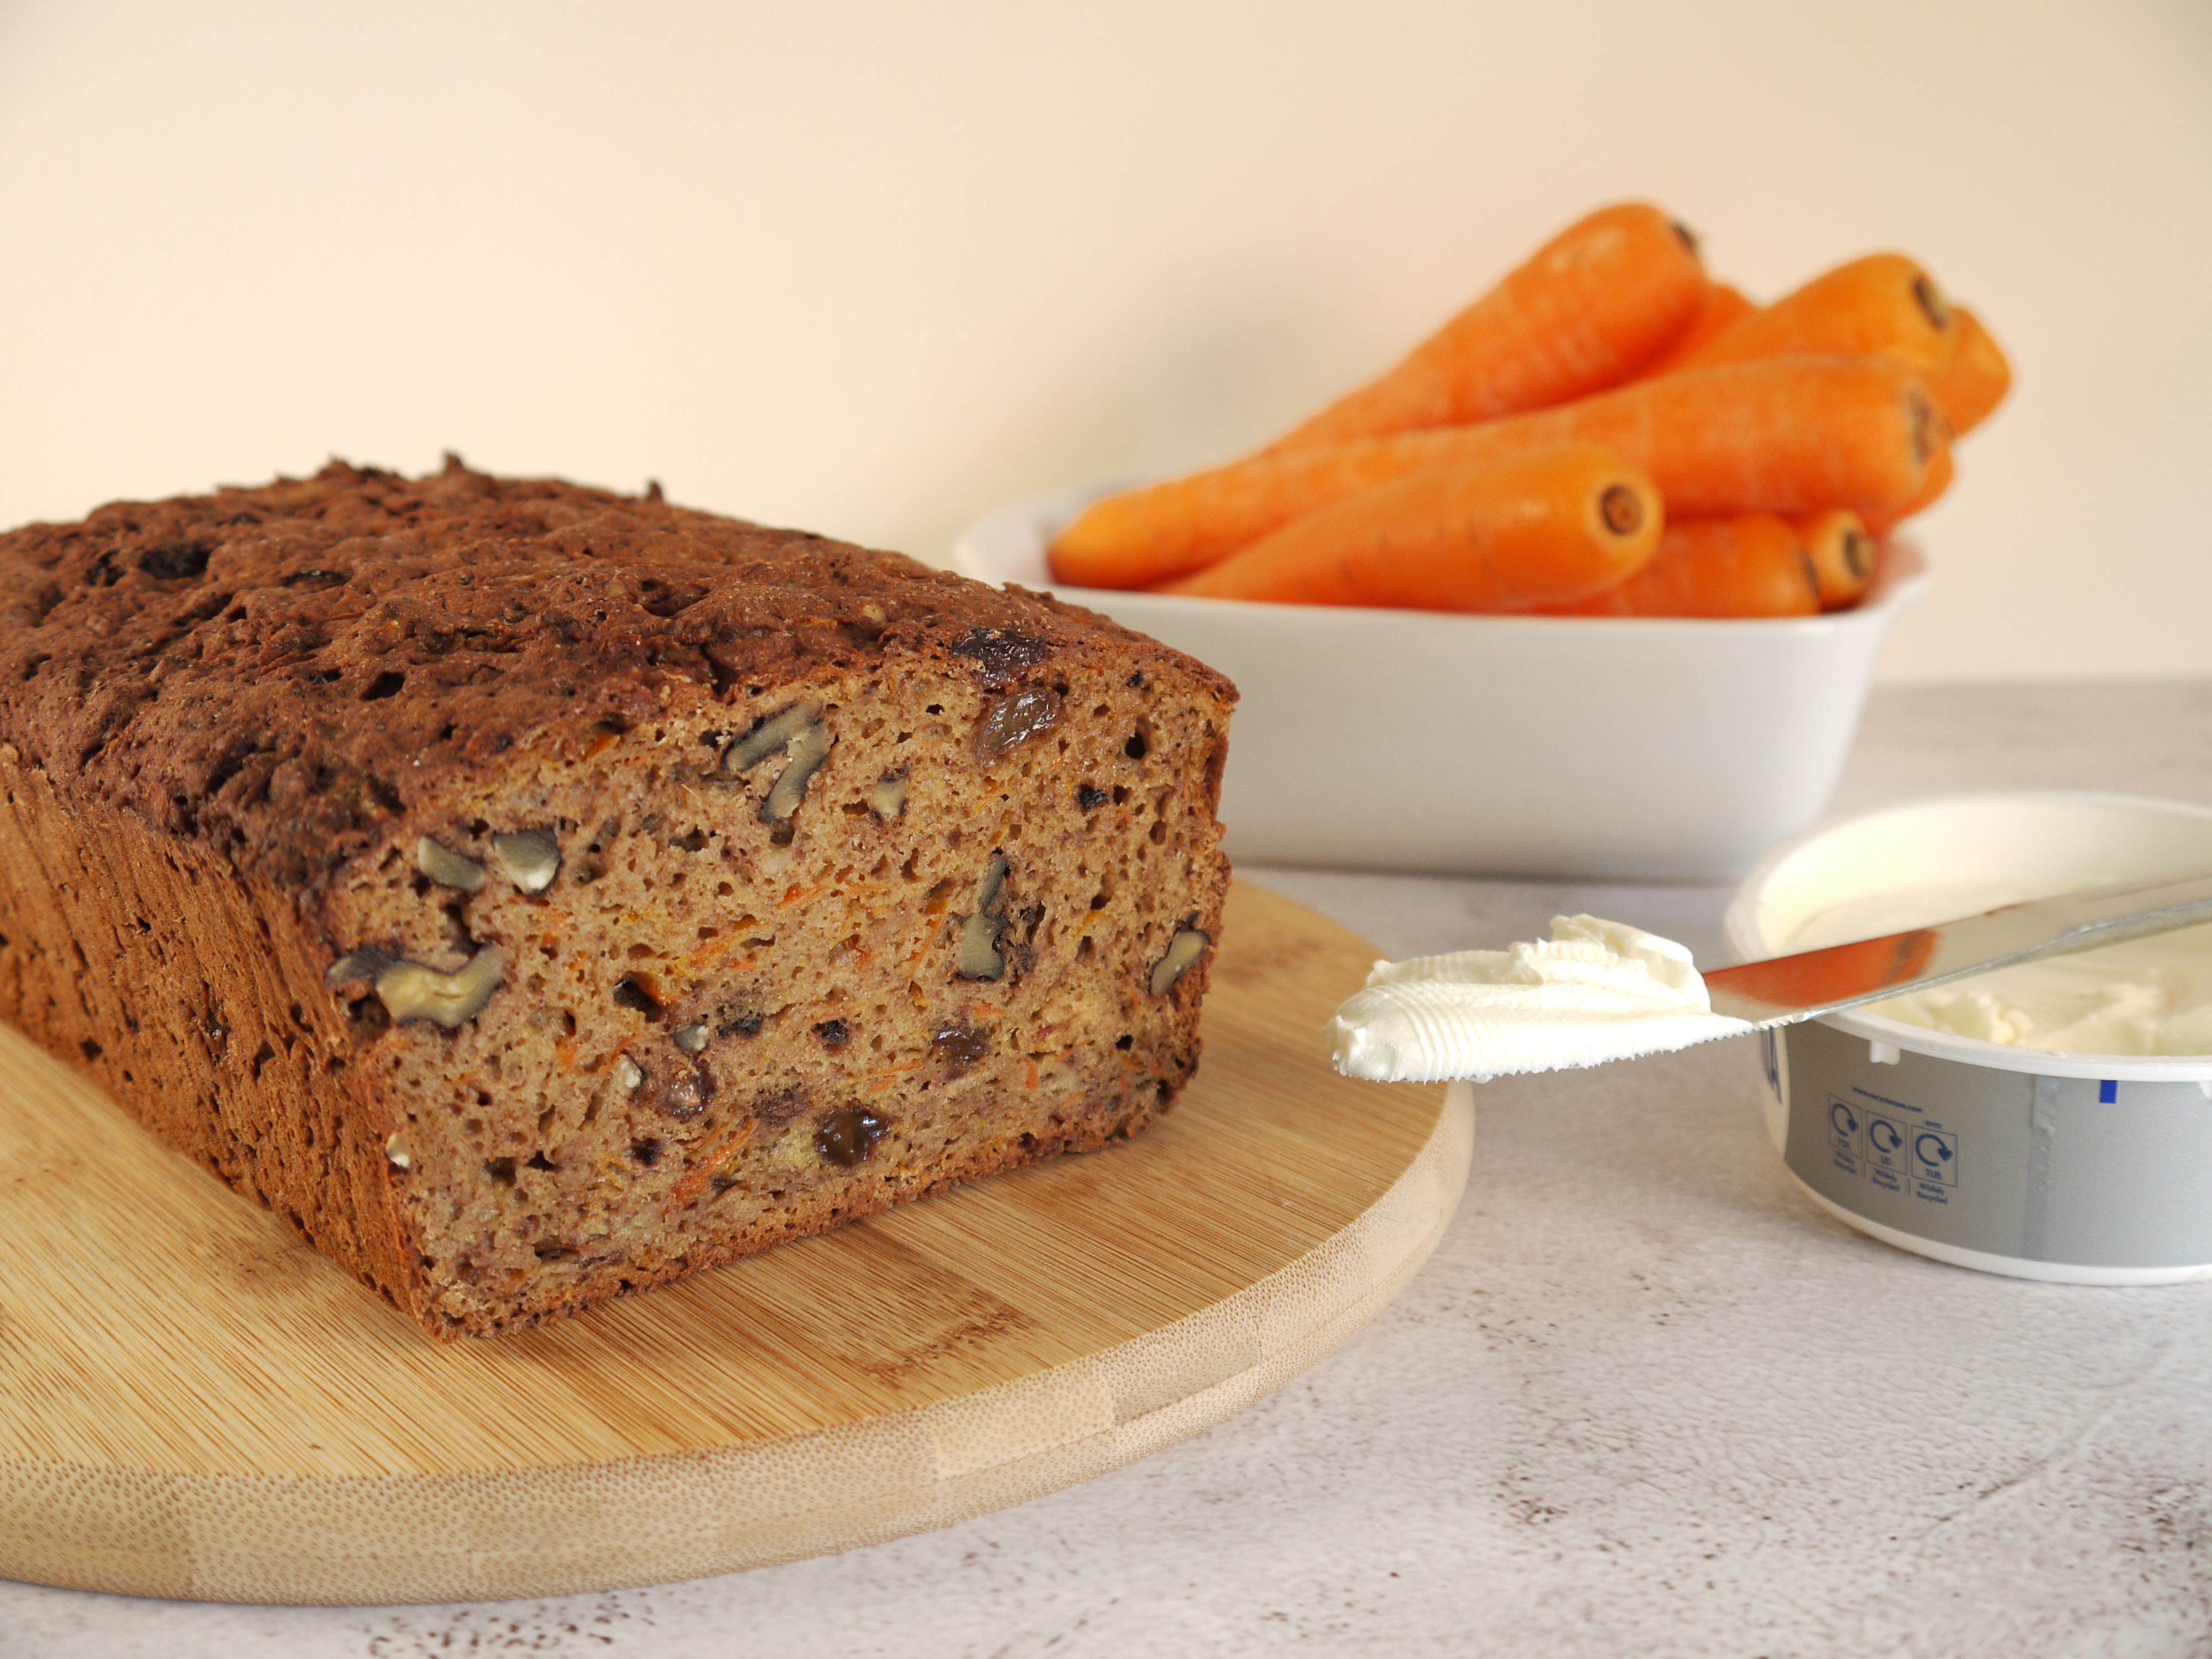 Carrot and Sultana Spice Bread